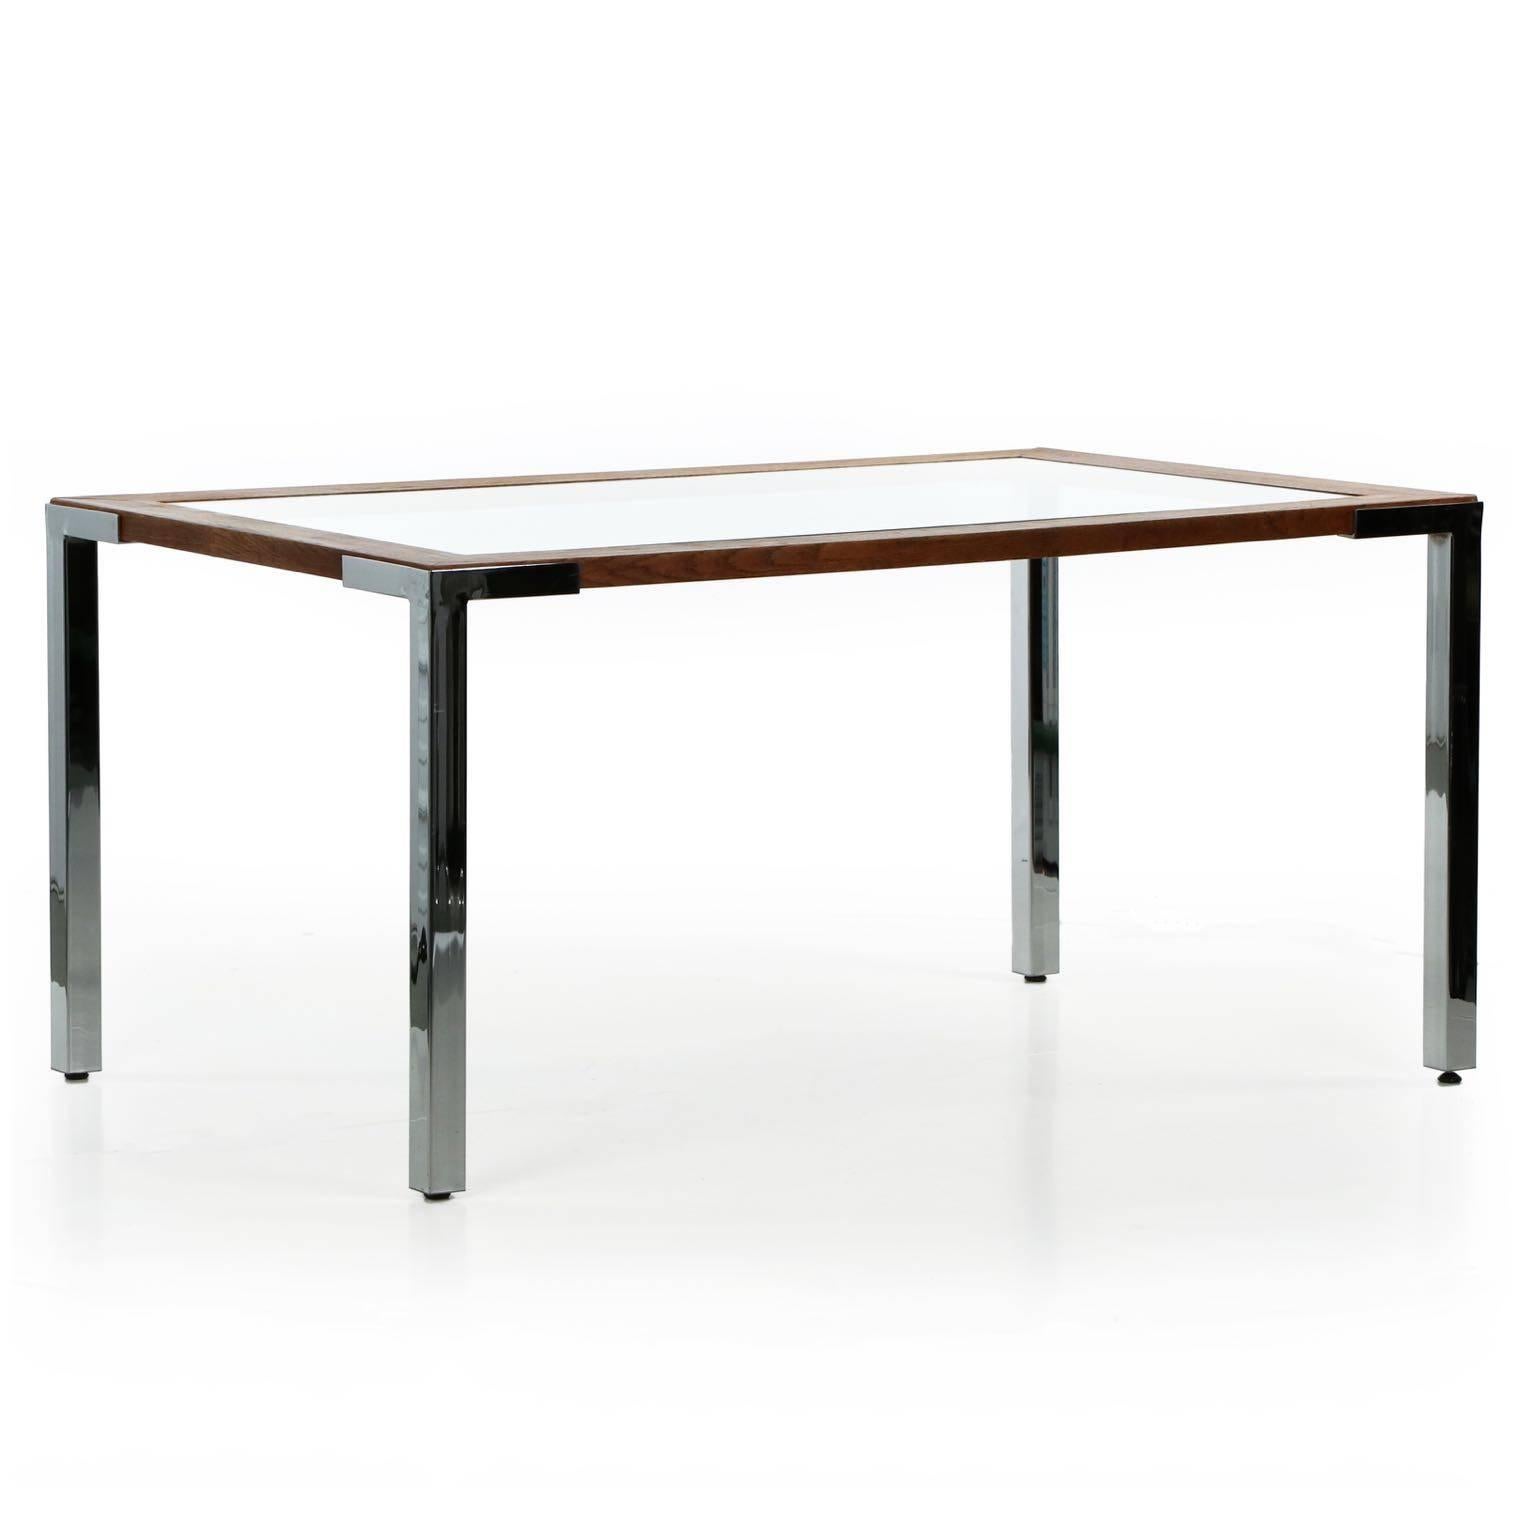 A most interesting minimalist dining table, the quality self-evident in the relentless lamination of oak using half-dovetail keys to lock the frame together. A thick glass pane drops into the recessed groove around the edge of the table; this raised